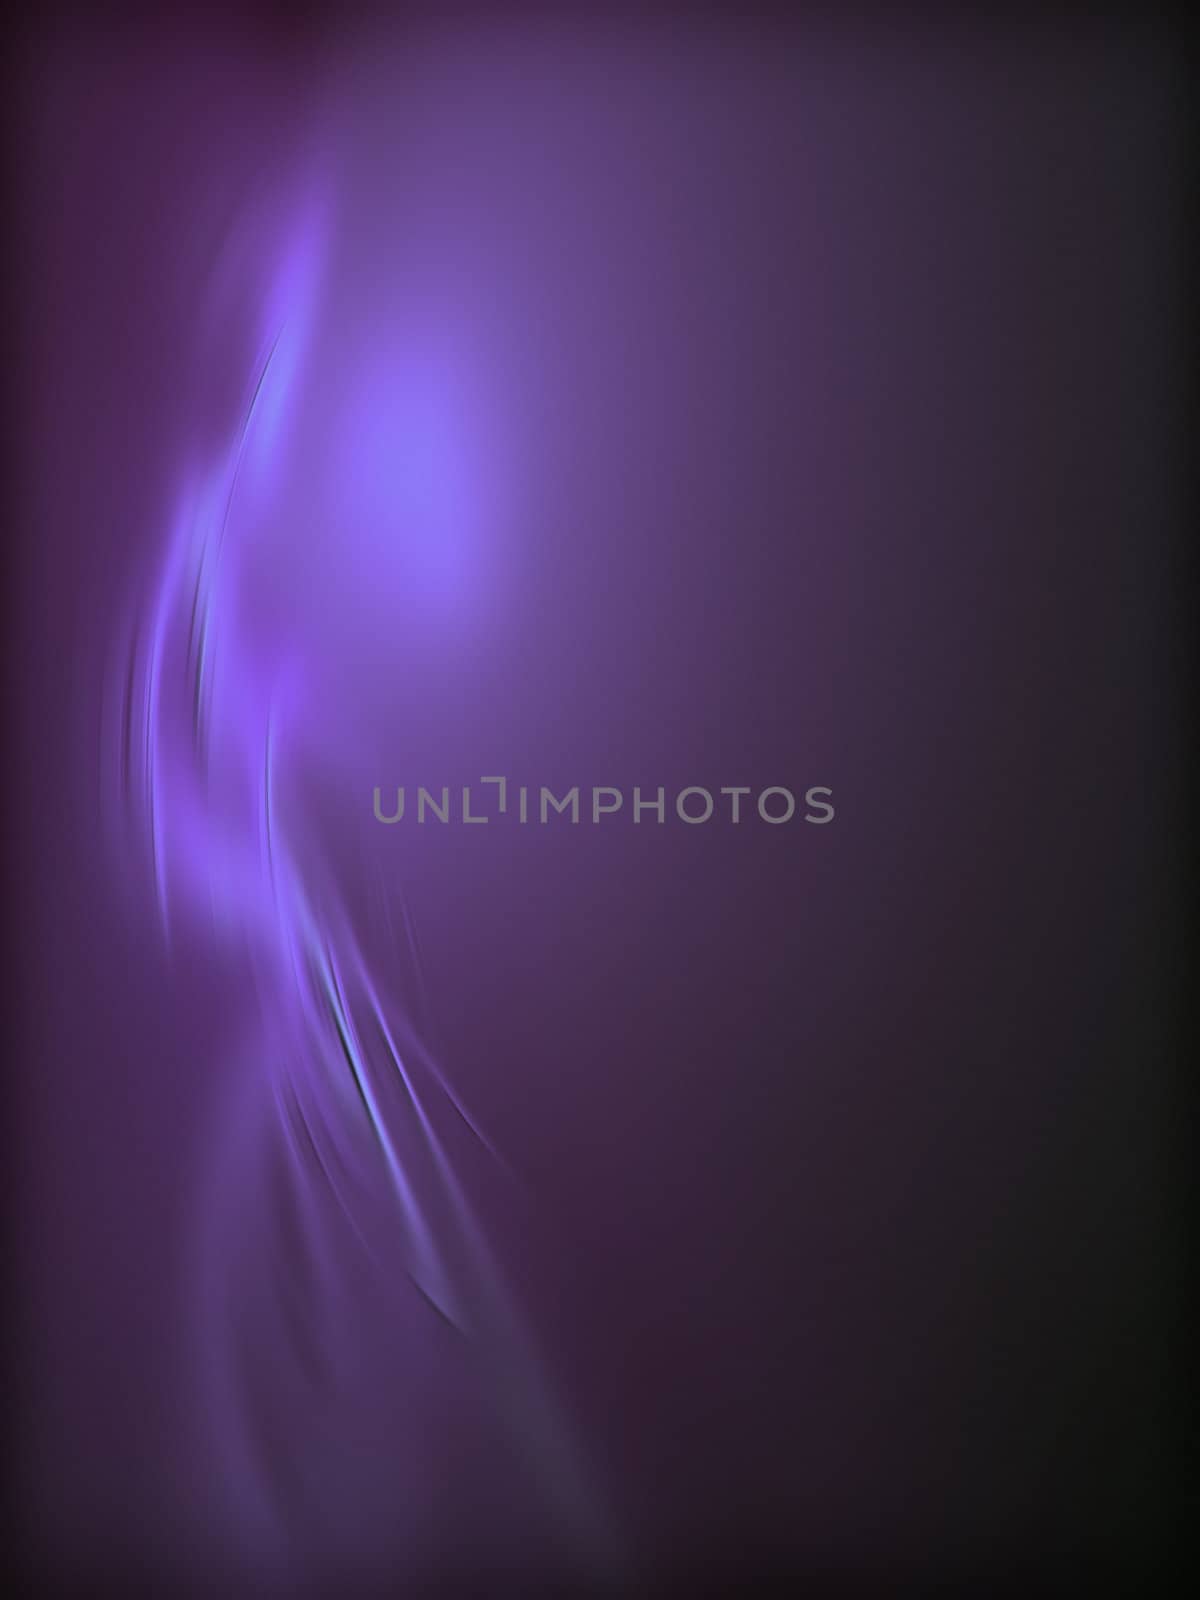 An image of a nice purple background